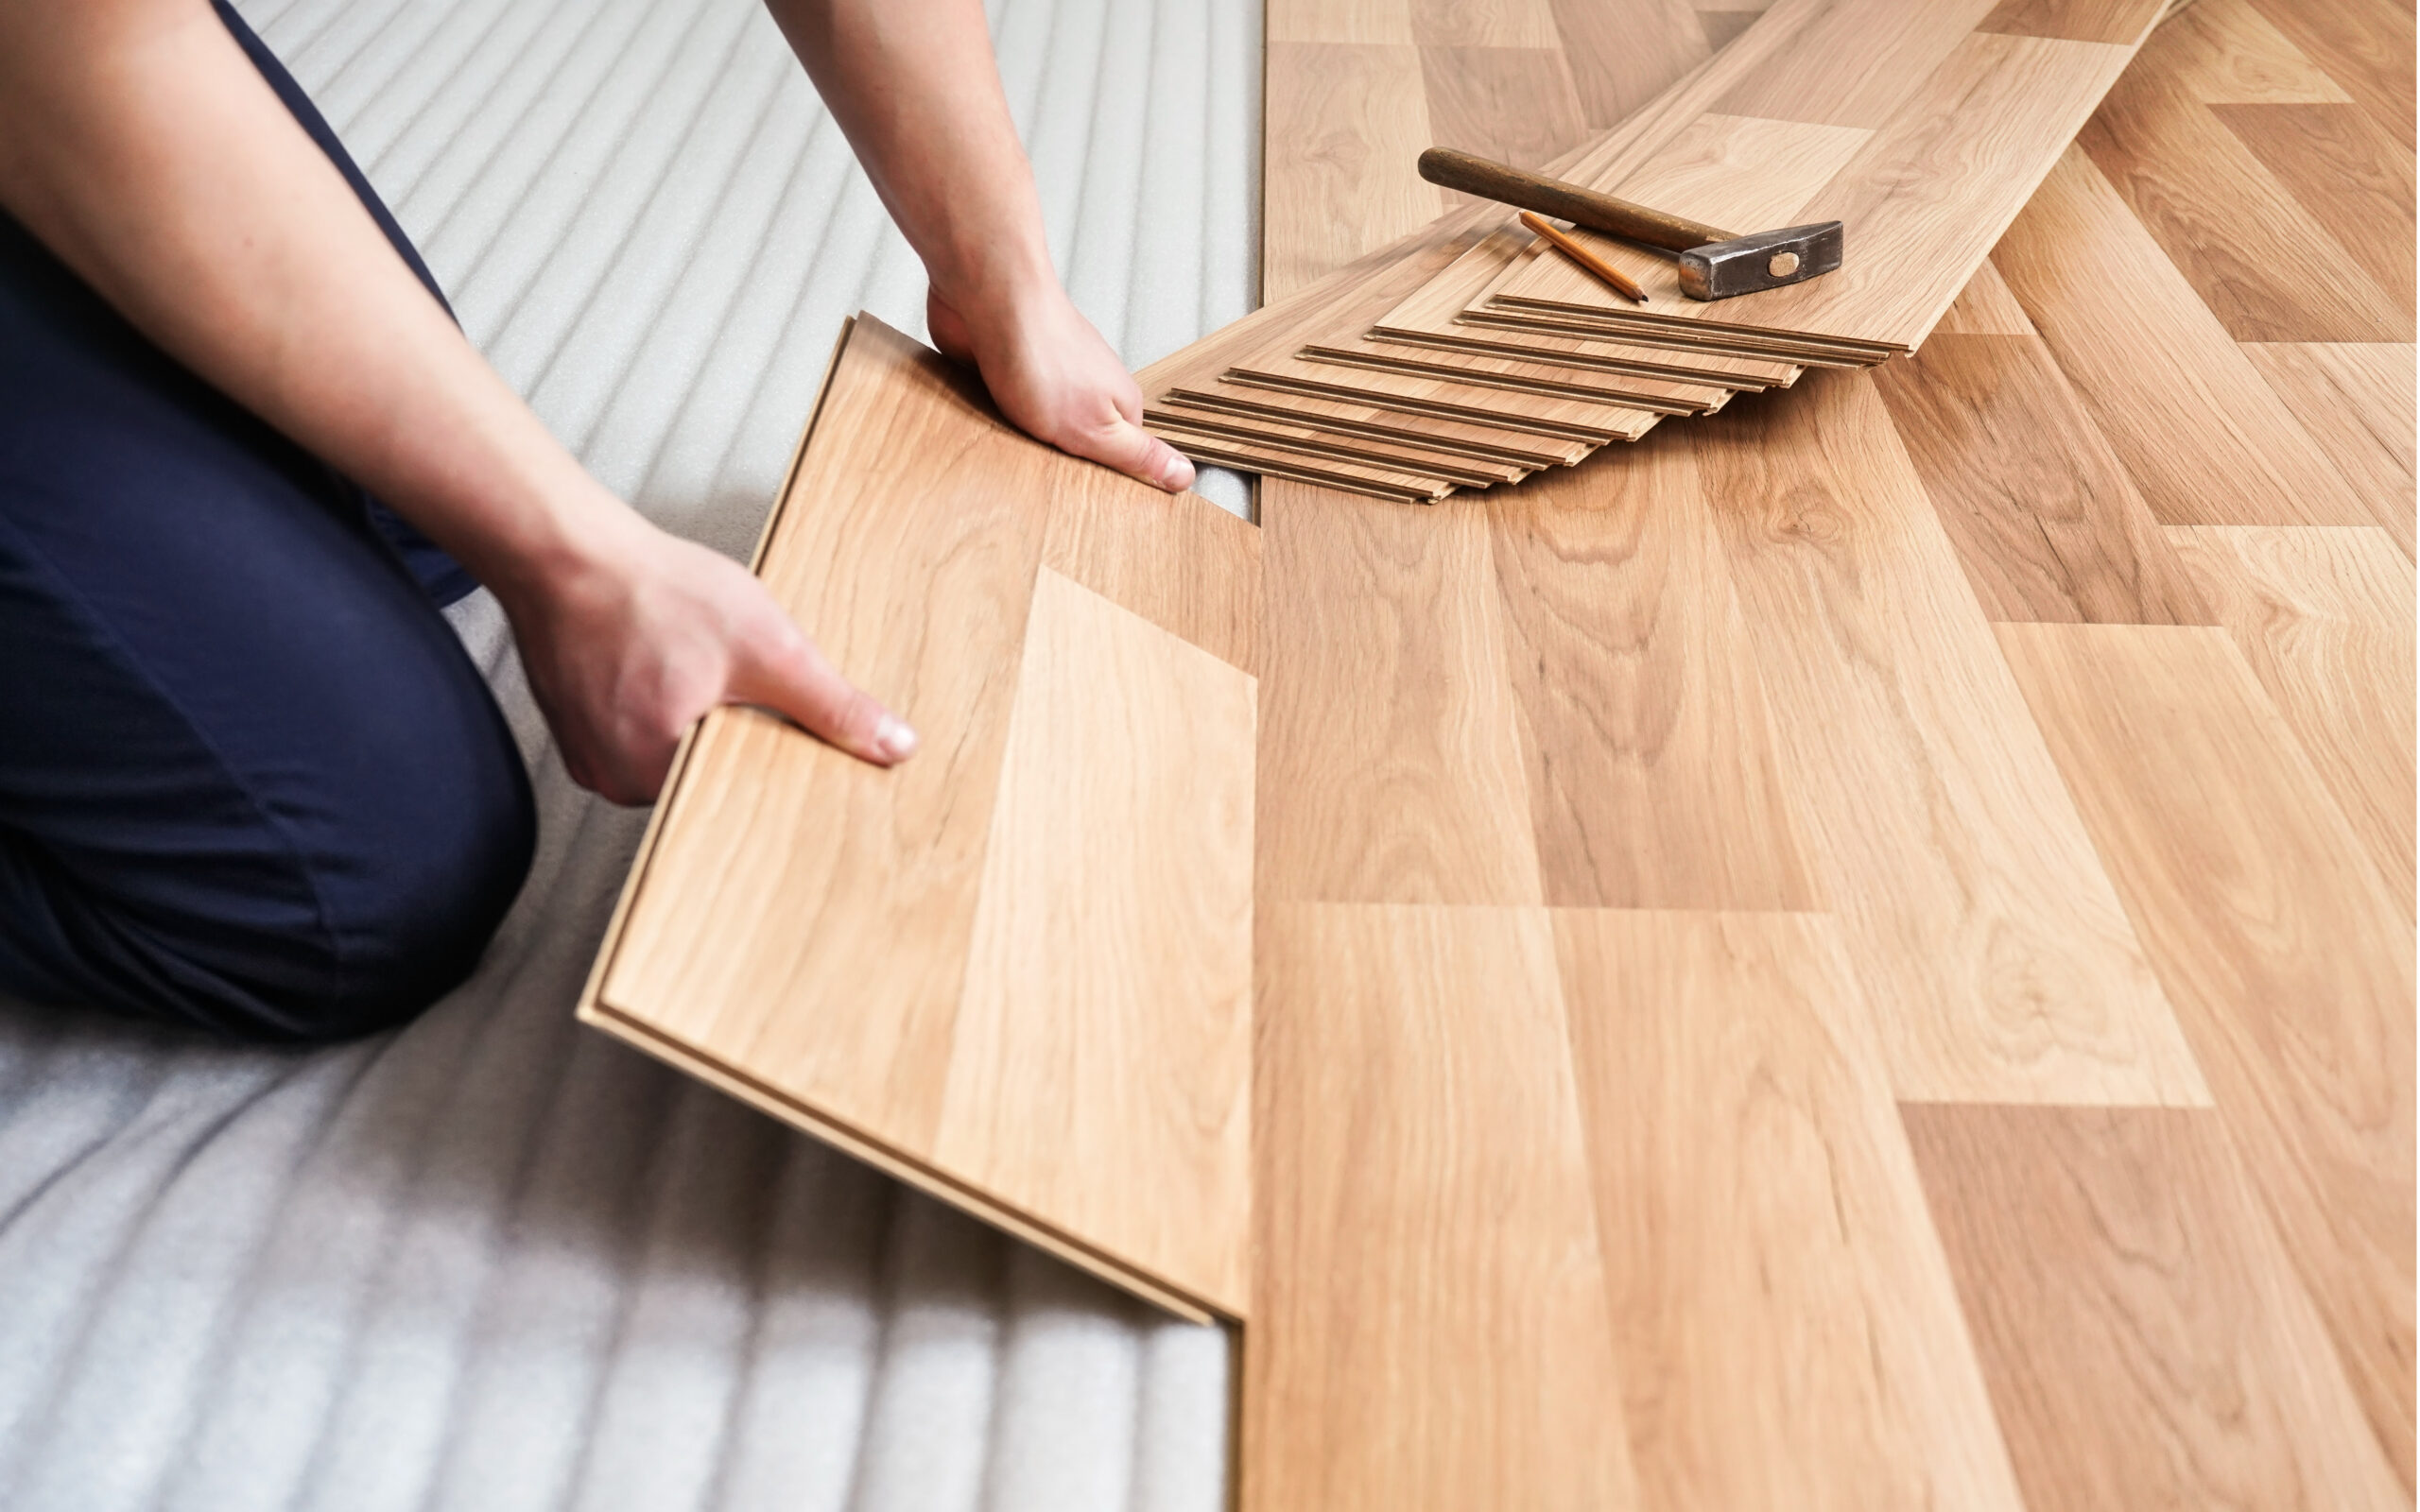 a person installing wood patterned laminated flooring with a hammer, a pencil and a stack of laminate floor tiles in the background